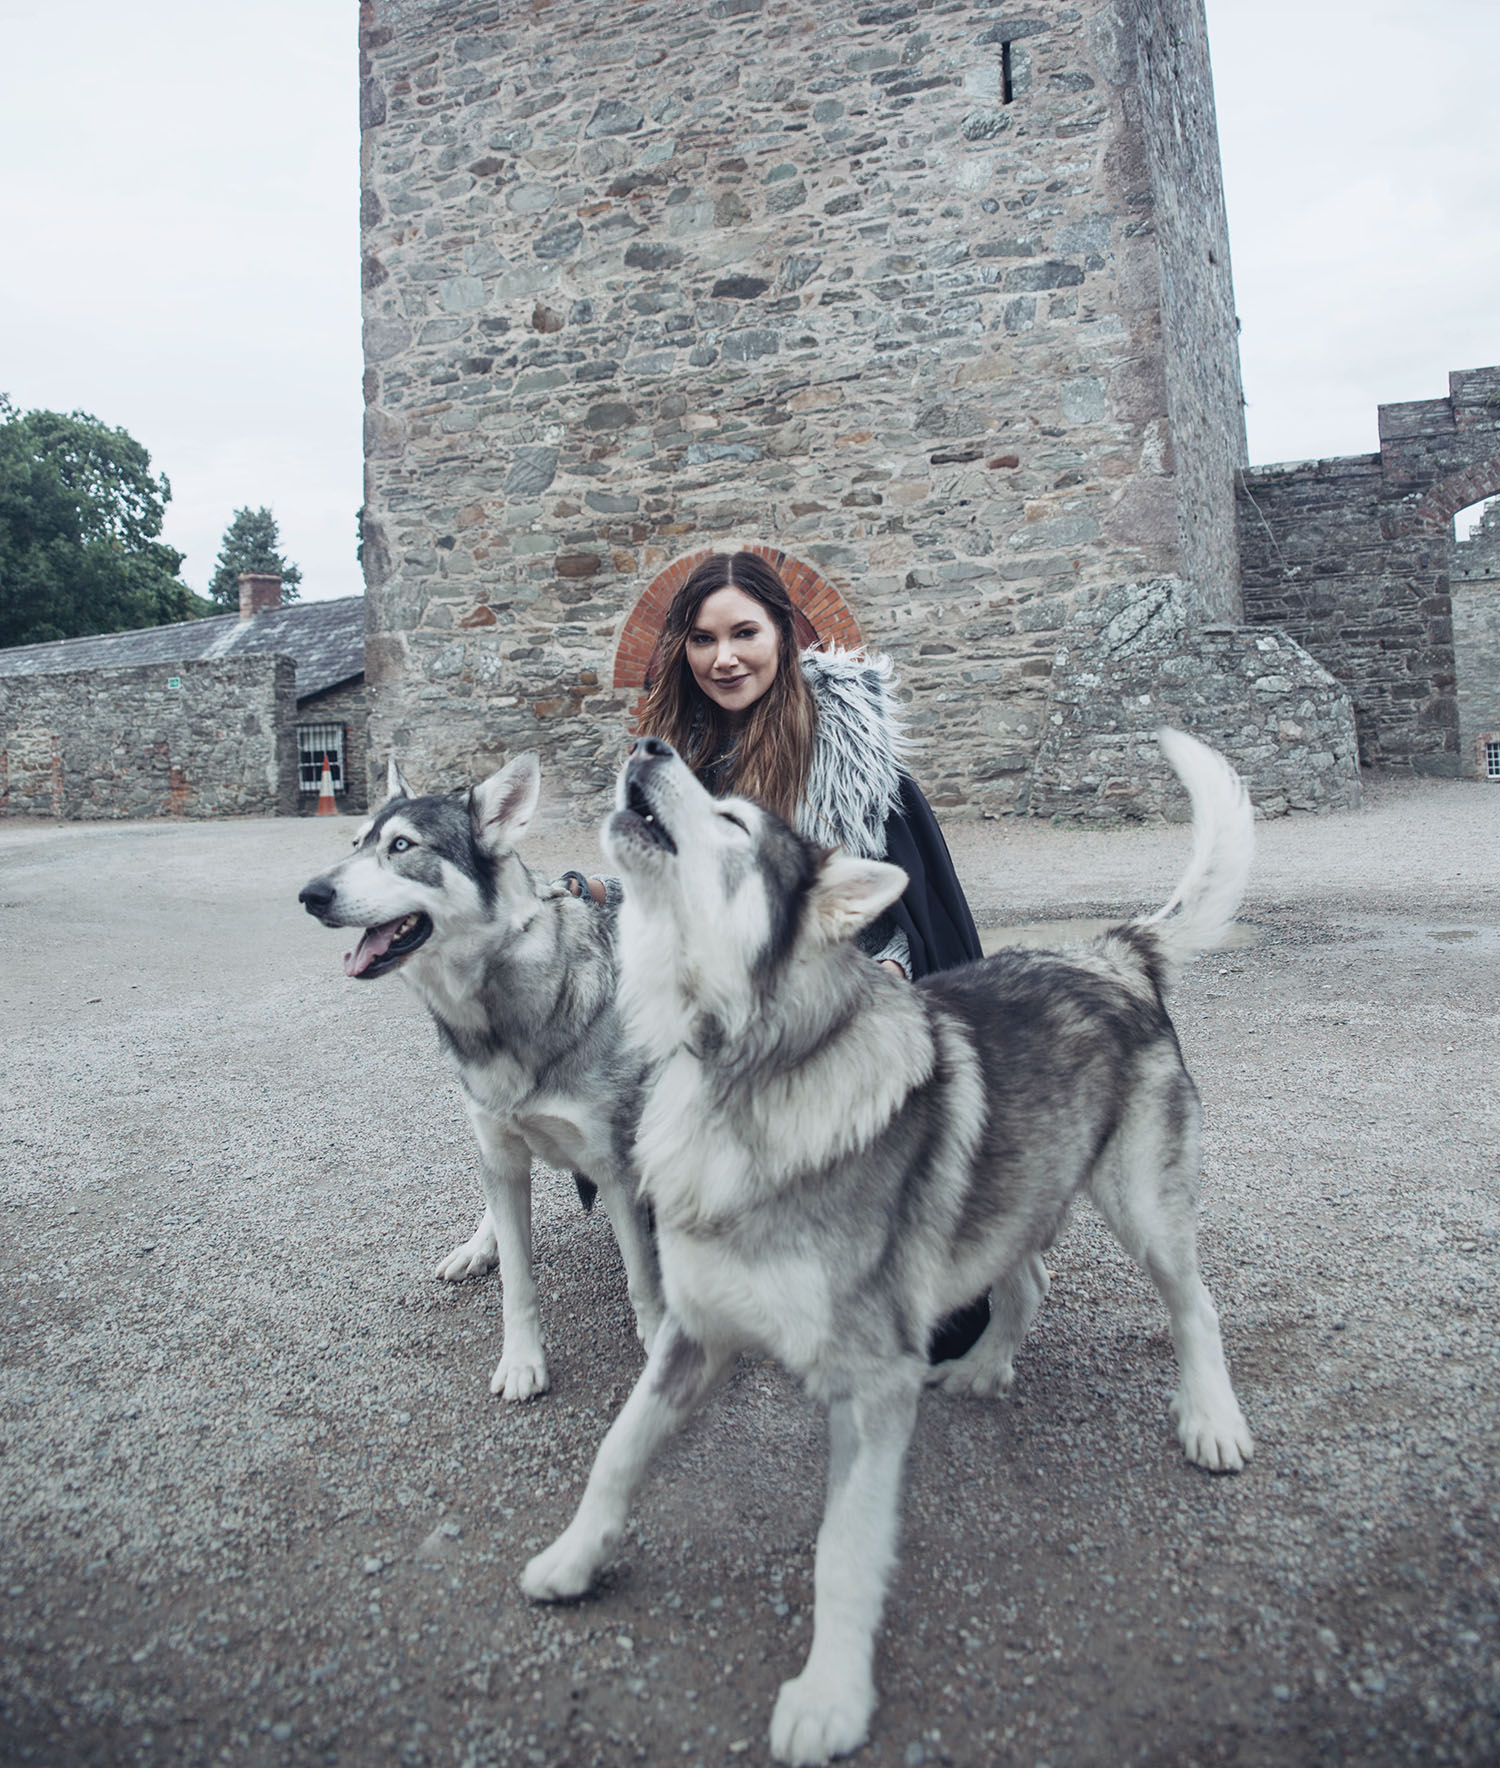 Meeting the direwolves Grey Wind and Summer from Game of Thrones